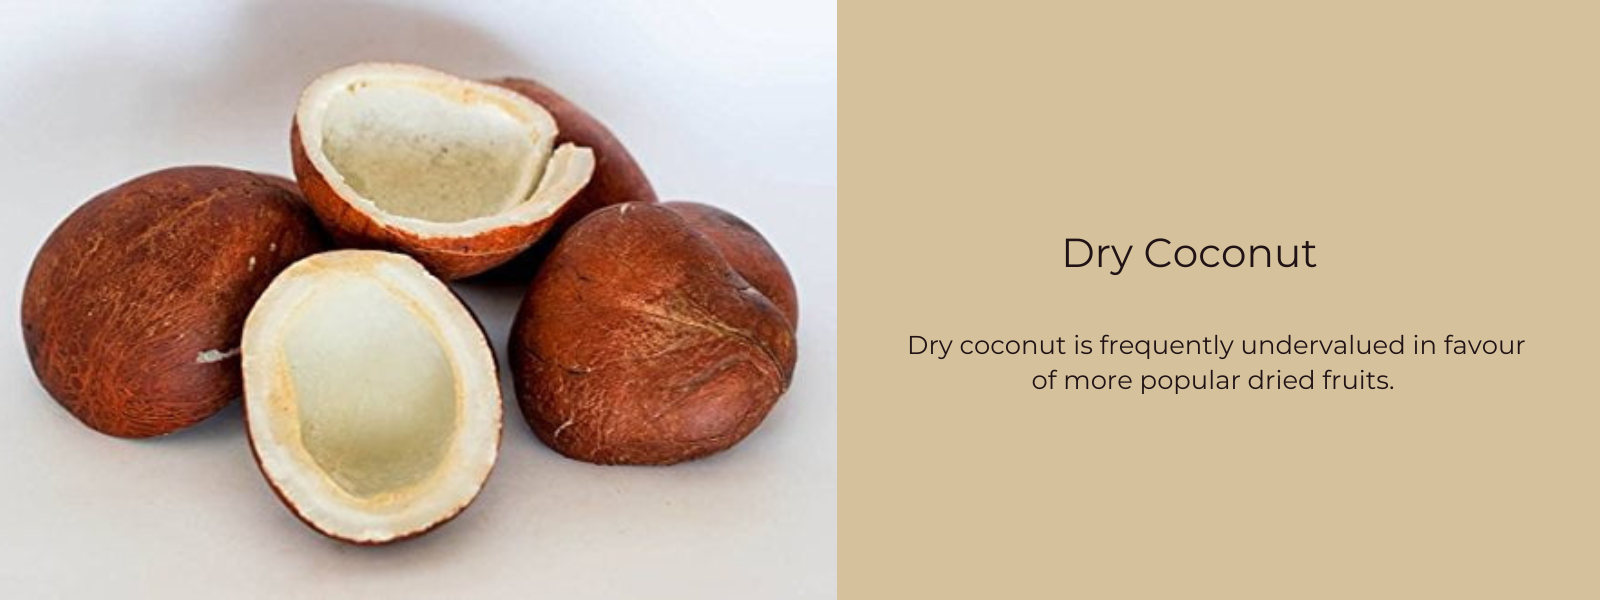 Dry Coconut – Health Benefits, Uses and Important Facts